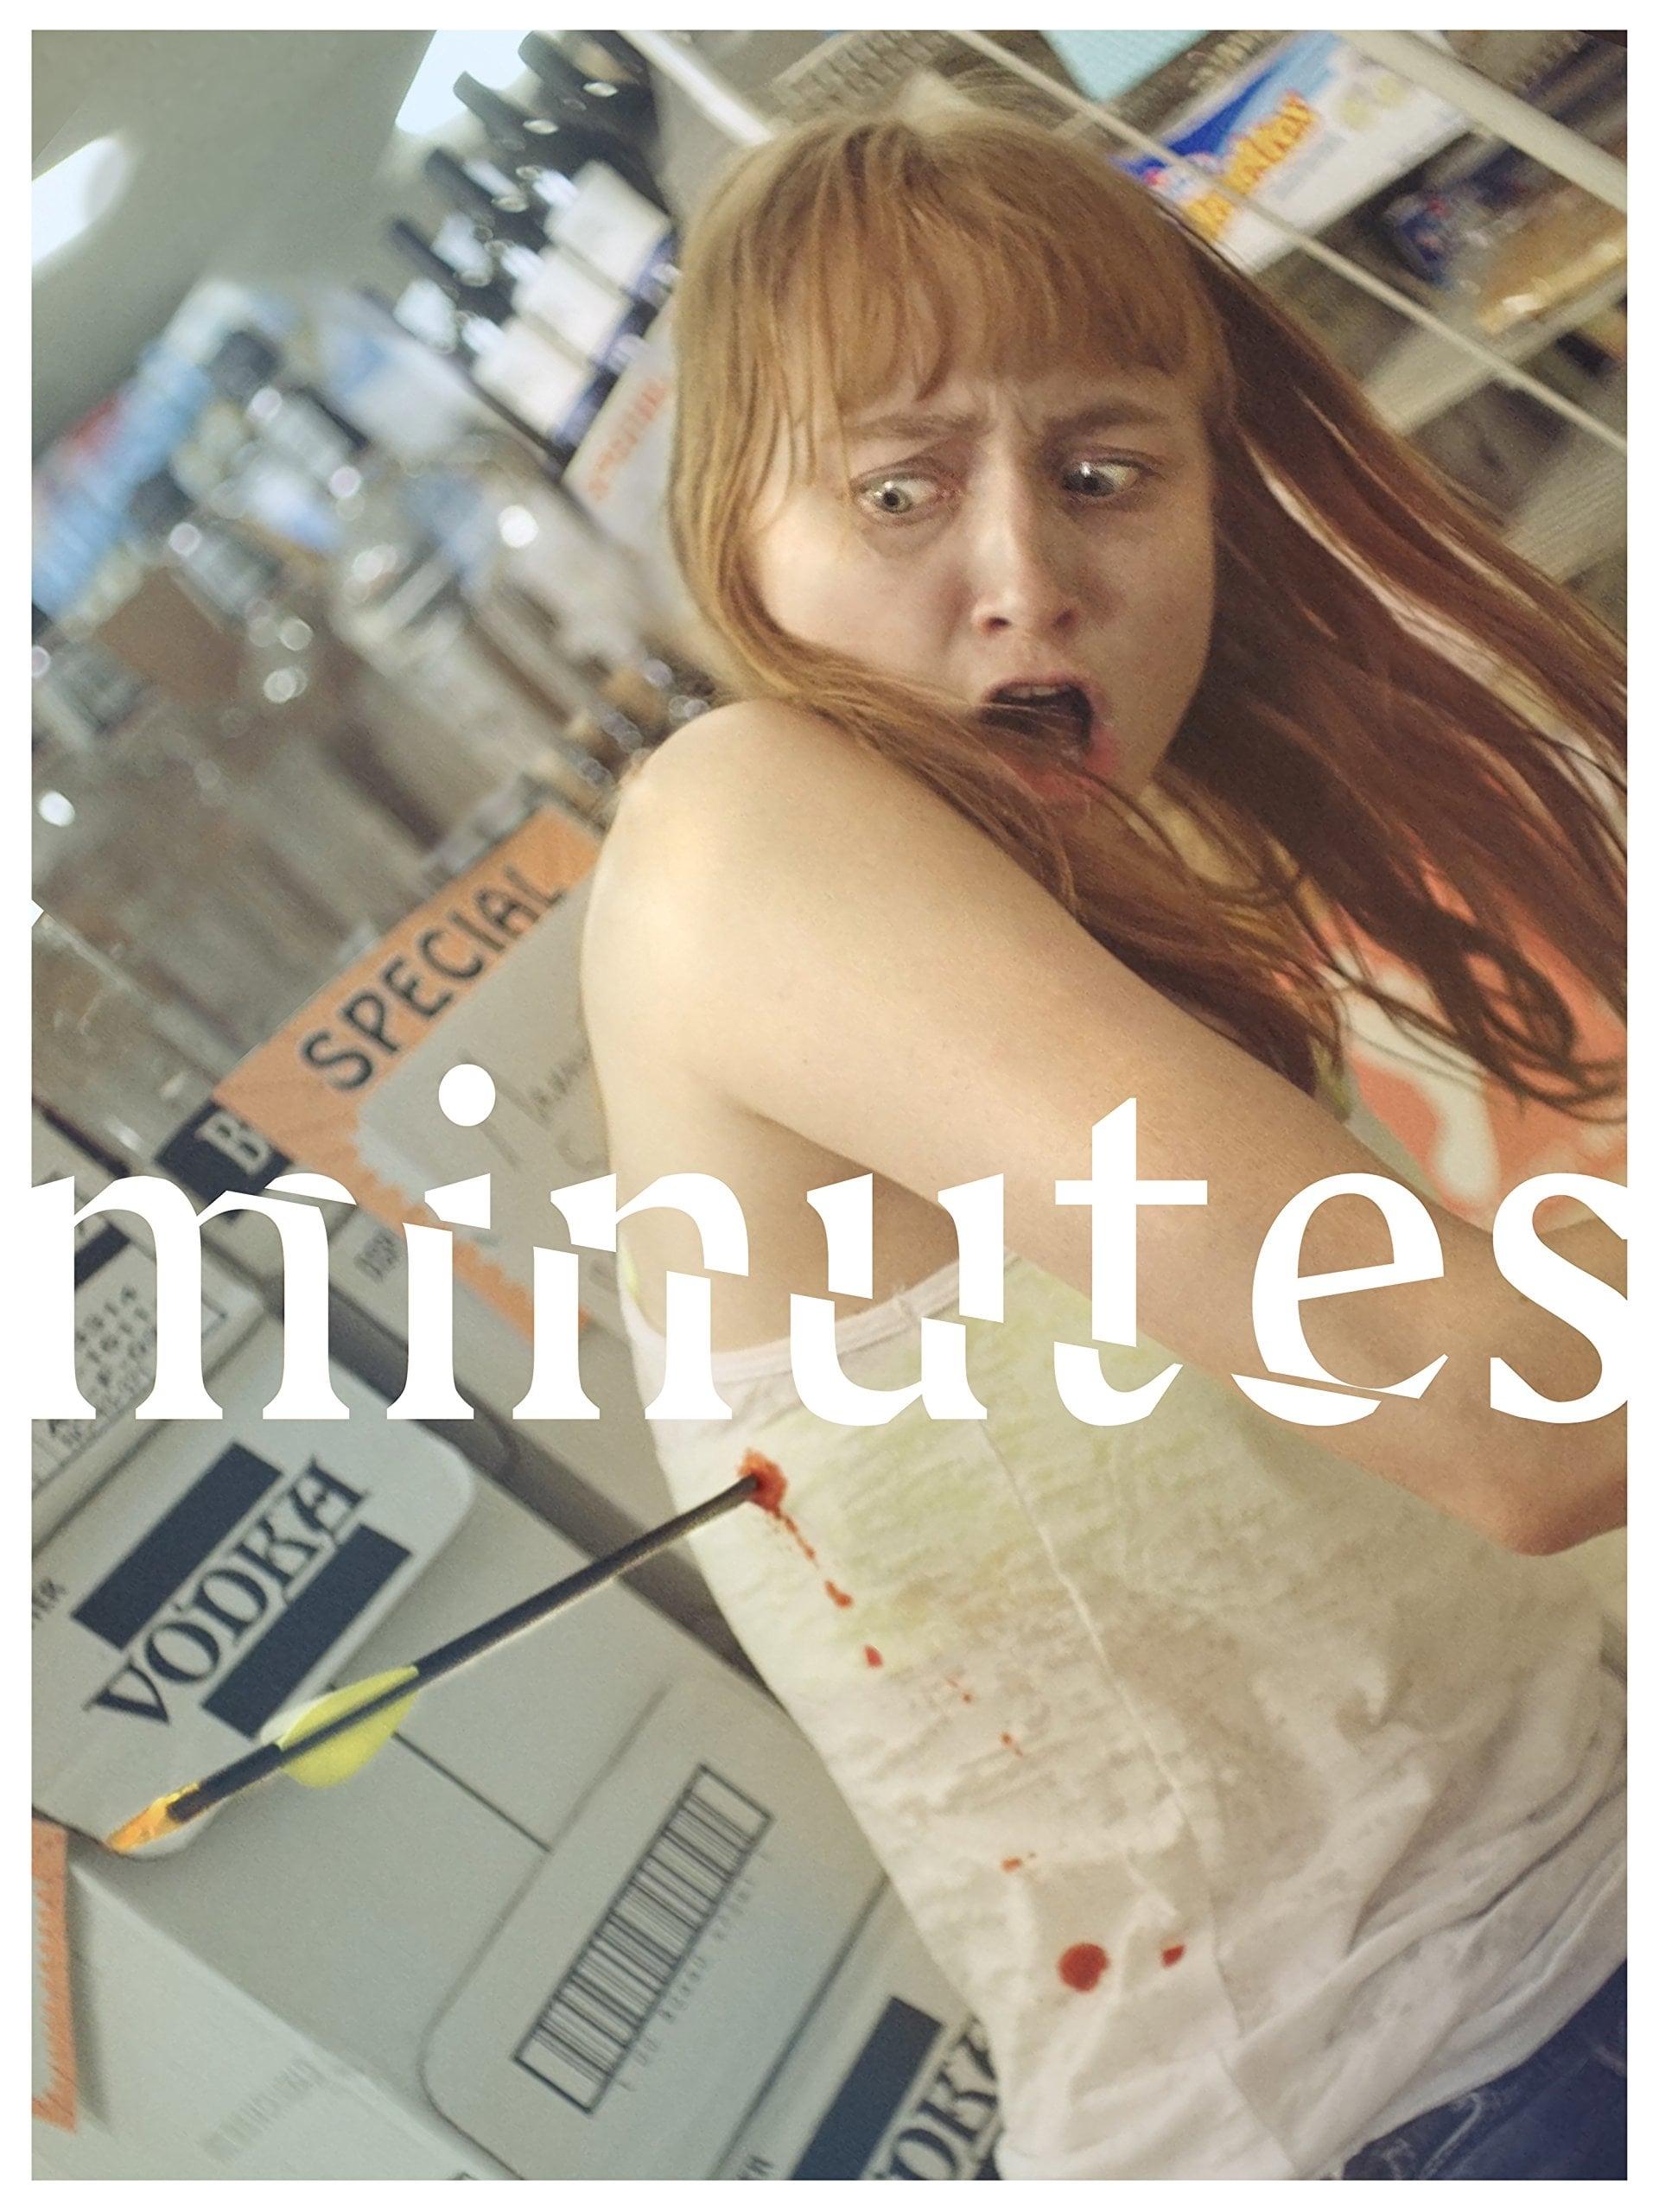 Minutes poster